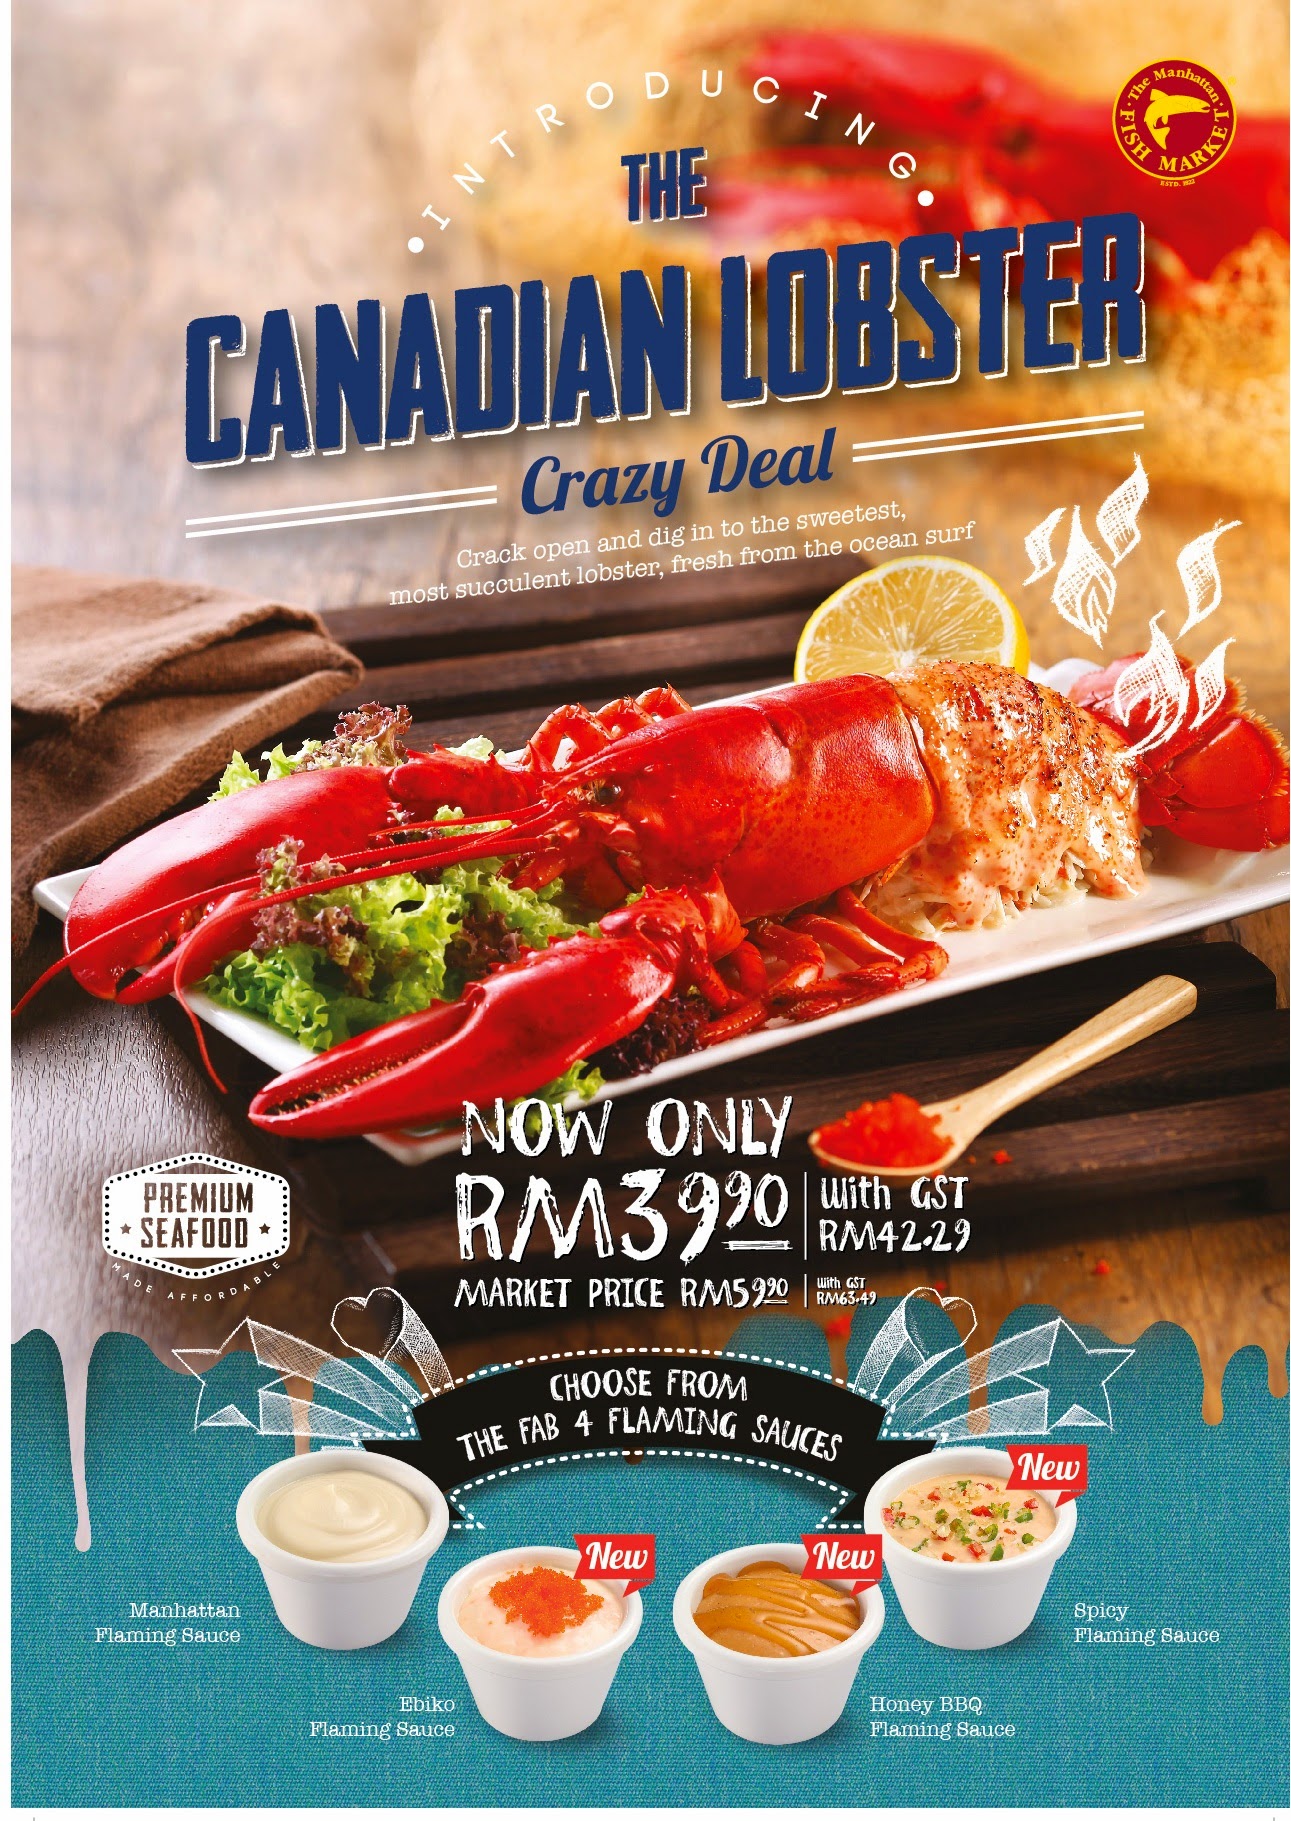 food review, Manhattan FISH MARKET, Nu Sentral, Malaysia, Lobster murah, cheap lobster in town, Canadian Lobster, manhattan fish market lobster menu,